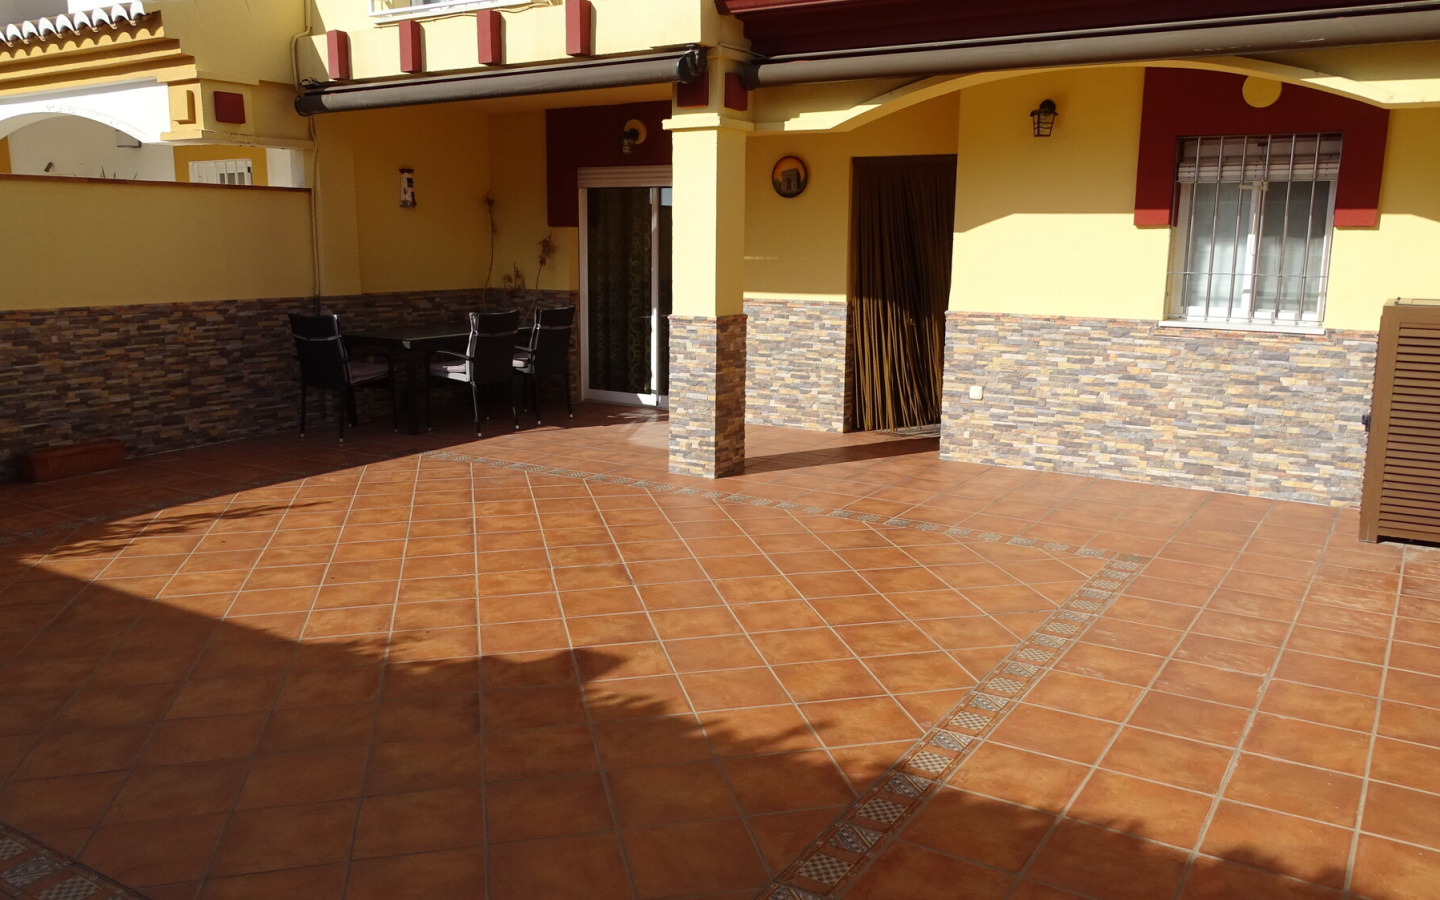 Carchuna. Beach house with three bedrooms, garage and barbecue area